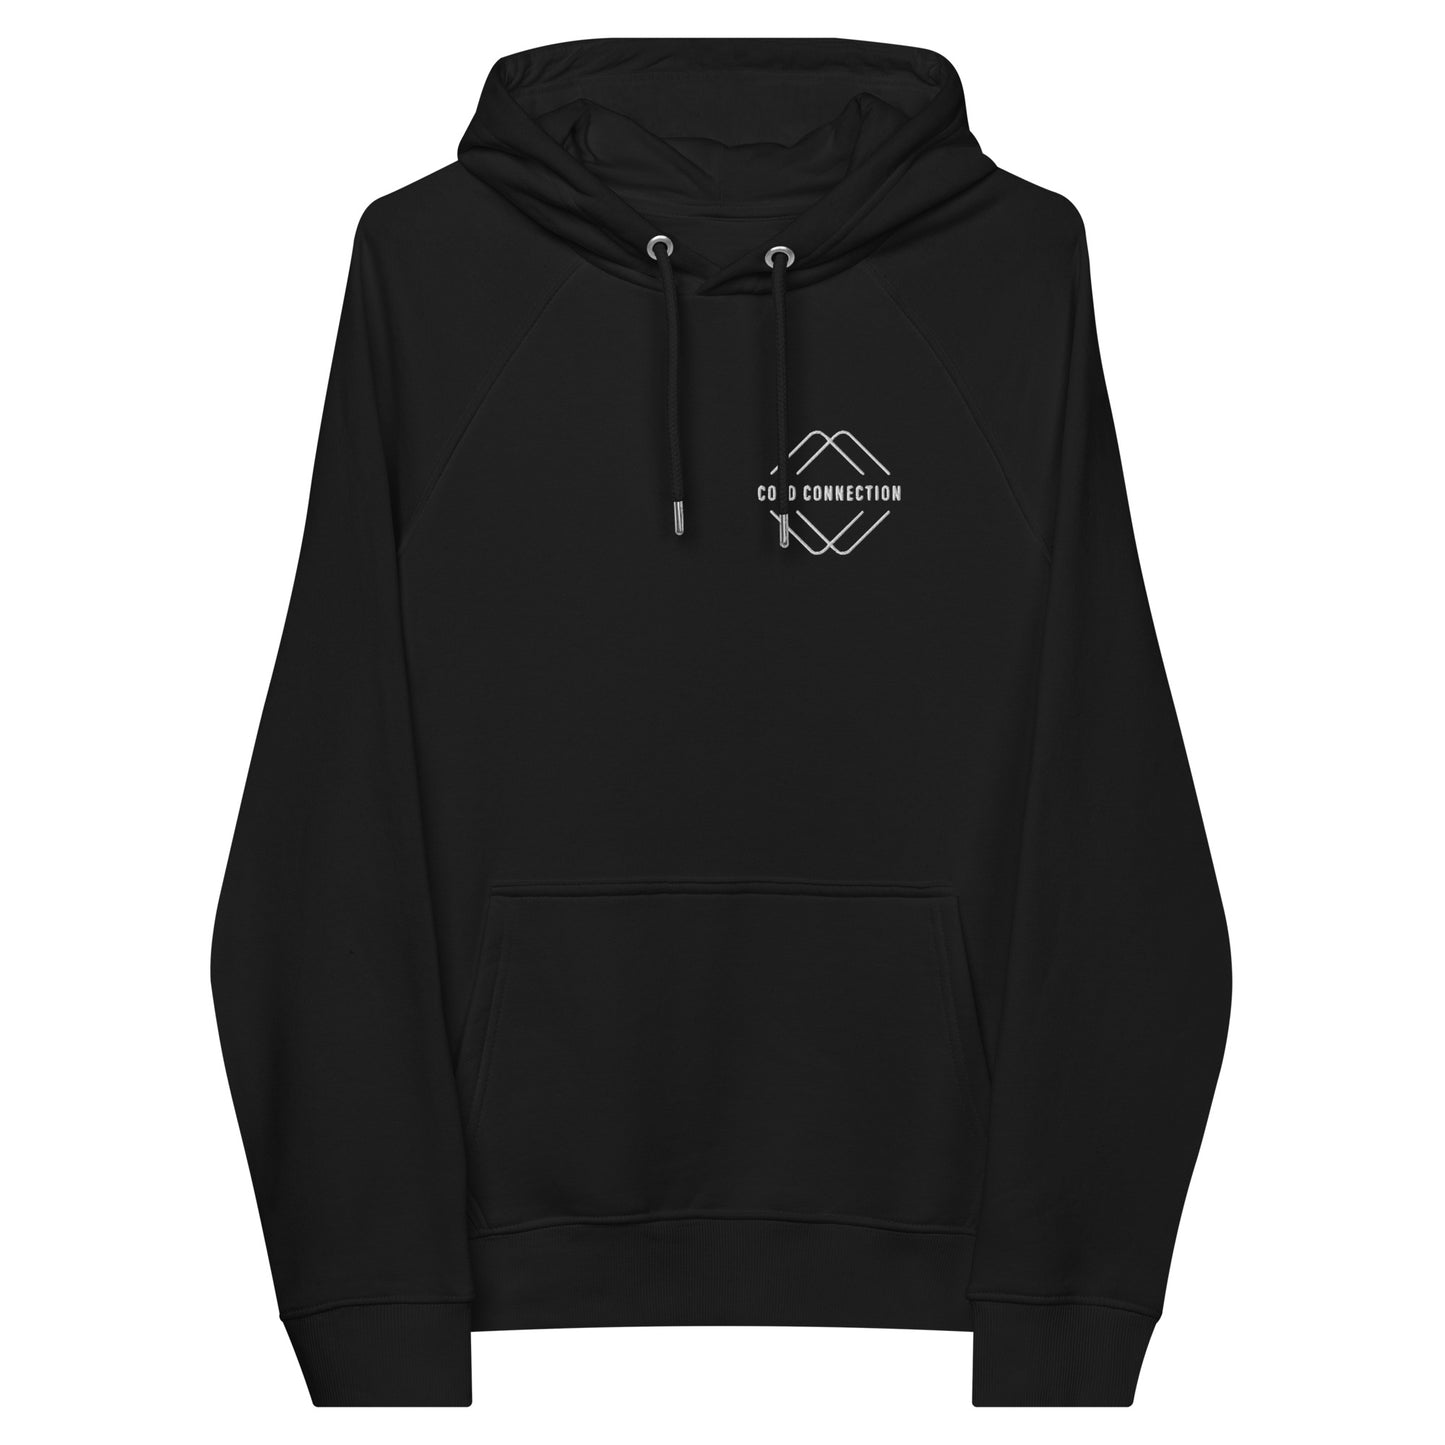 Cold Connection, official logo (embroidery), Unisex eco raglan hoodie